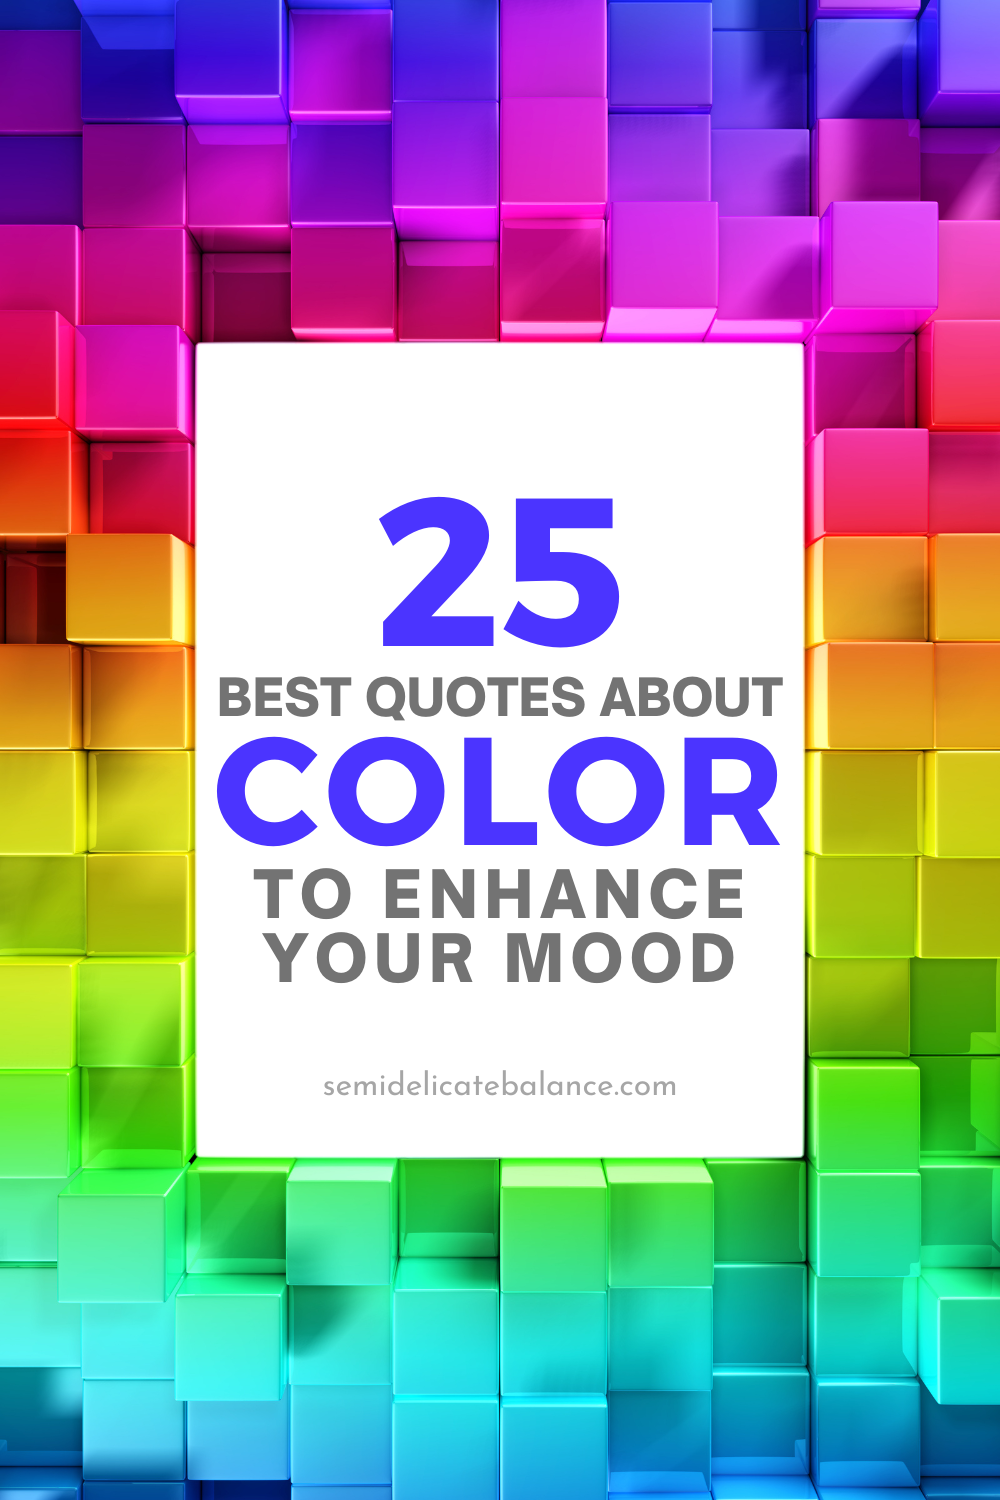 25 Best Quotes About Color To Enhance Your Mood - Semi-Delicate Balance